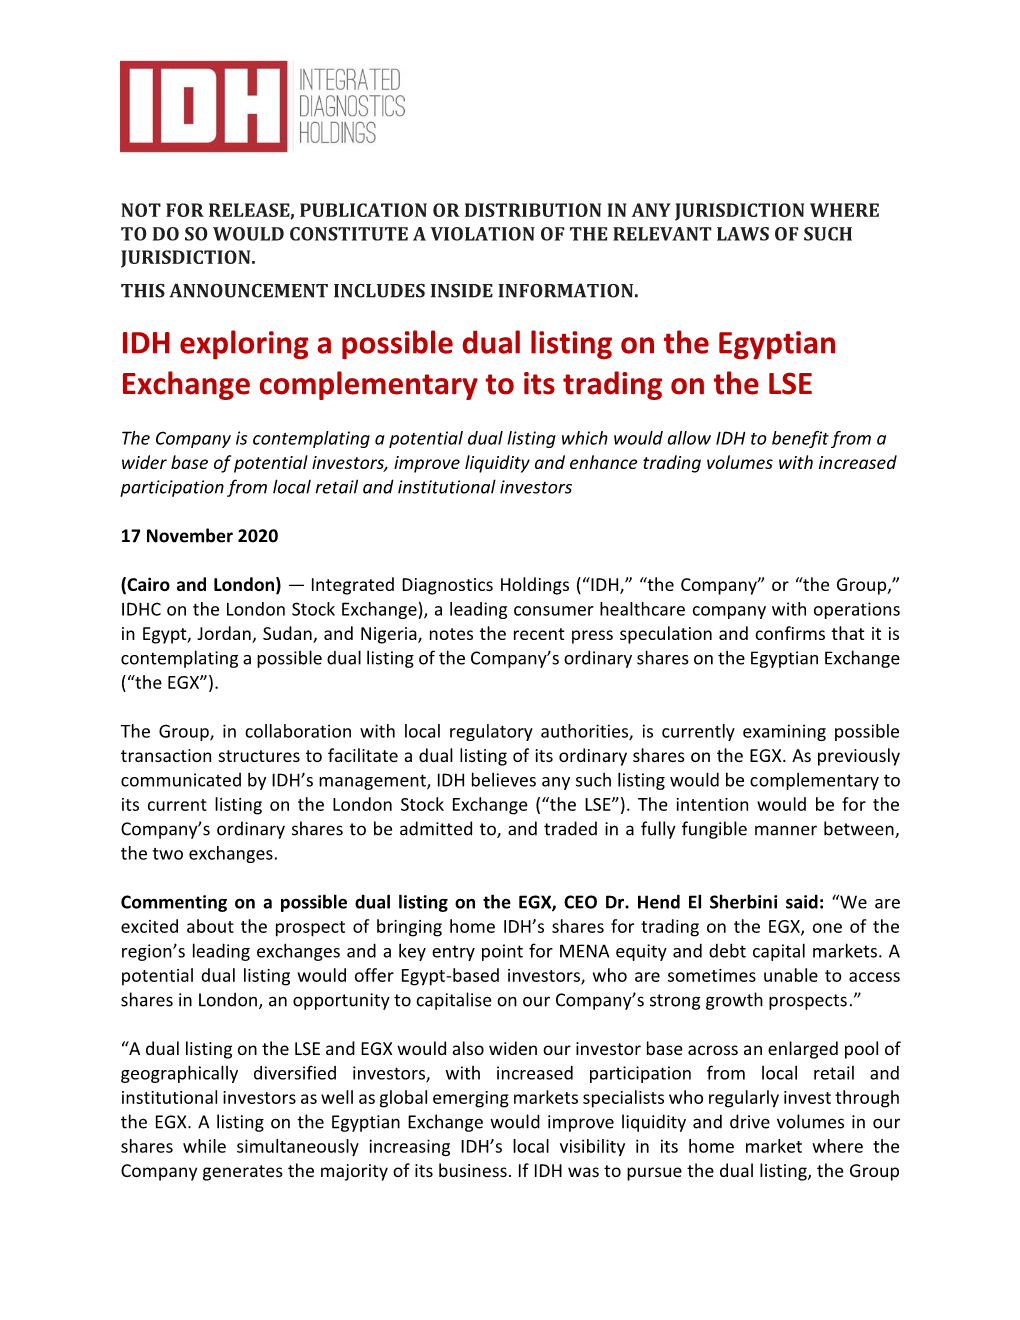 IDH Exploring a Possible Dual Listing on the Egyptian Exchange Complementary to Its Trading on the LSE